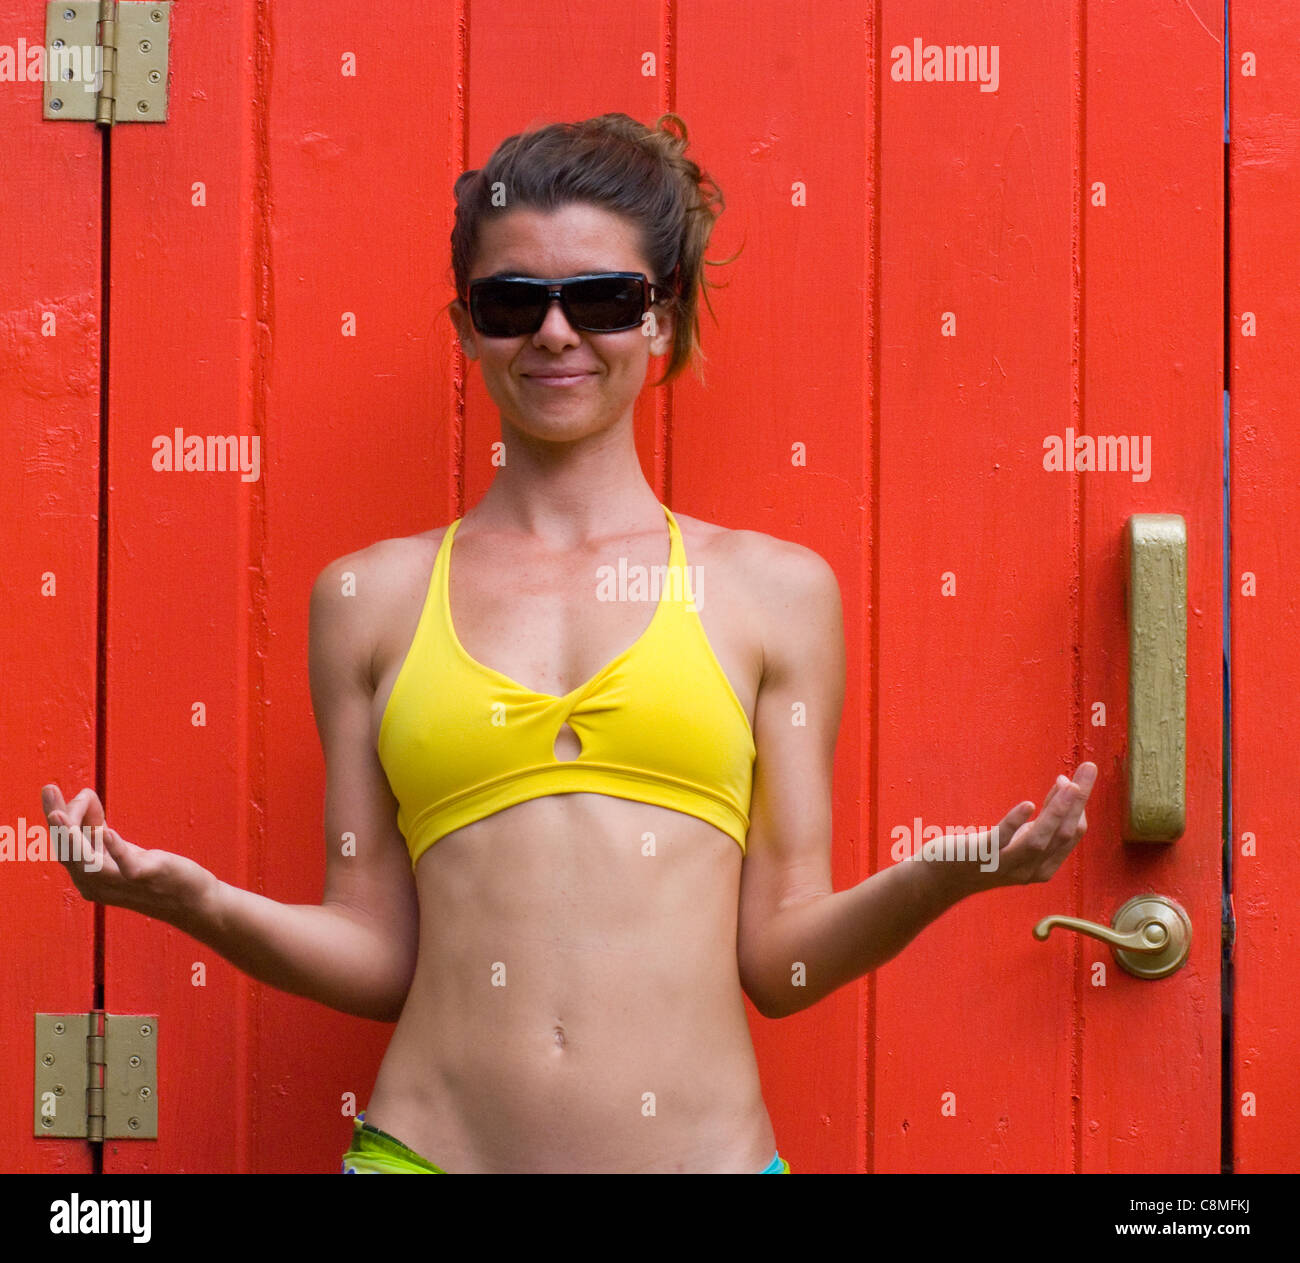 Young woman, age 21, in sunglasses standing in yellow swim suit in front of bright orange door making a mudra with her hands Stock Photo